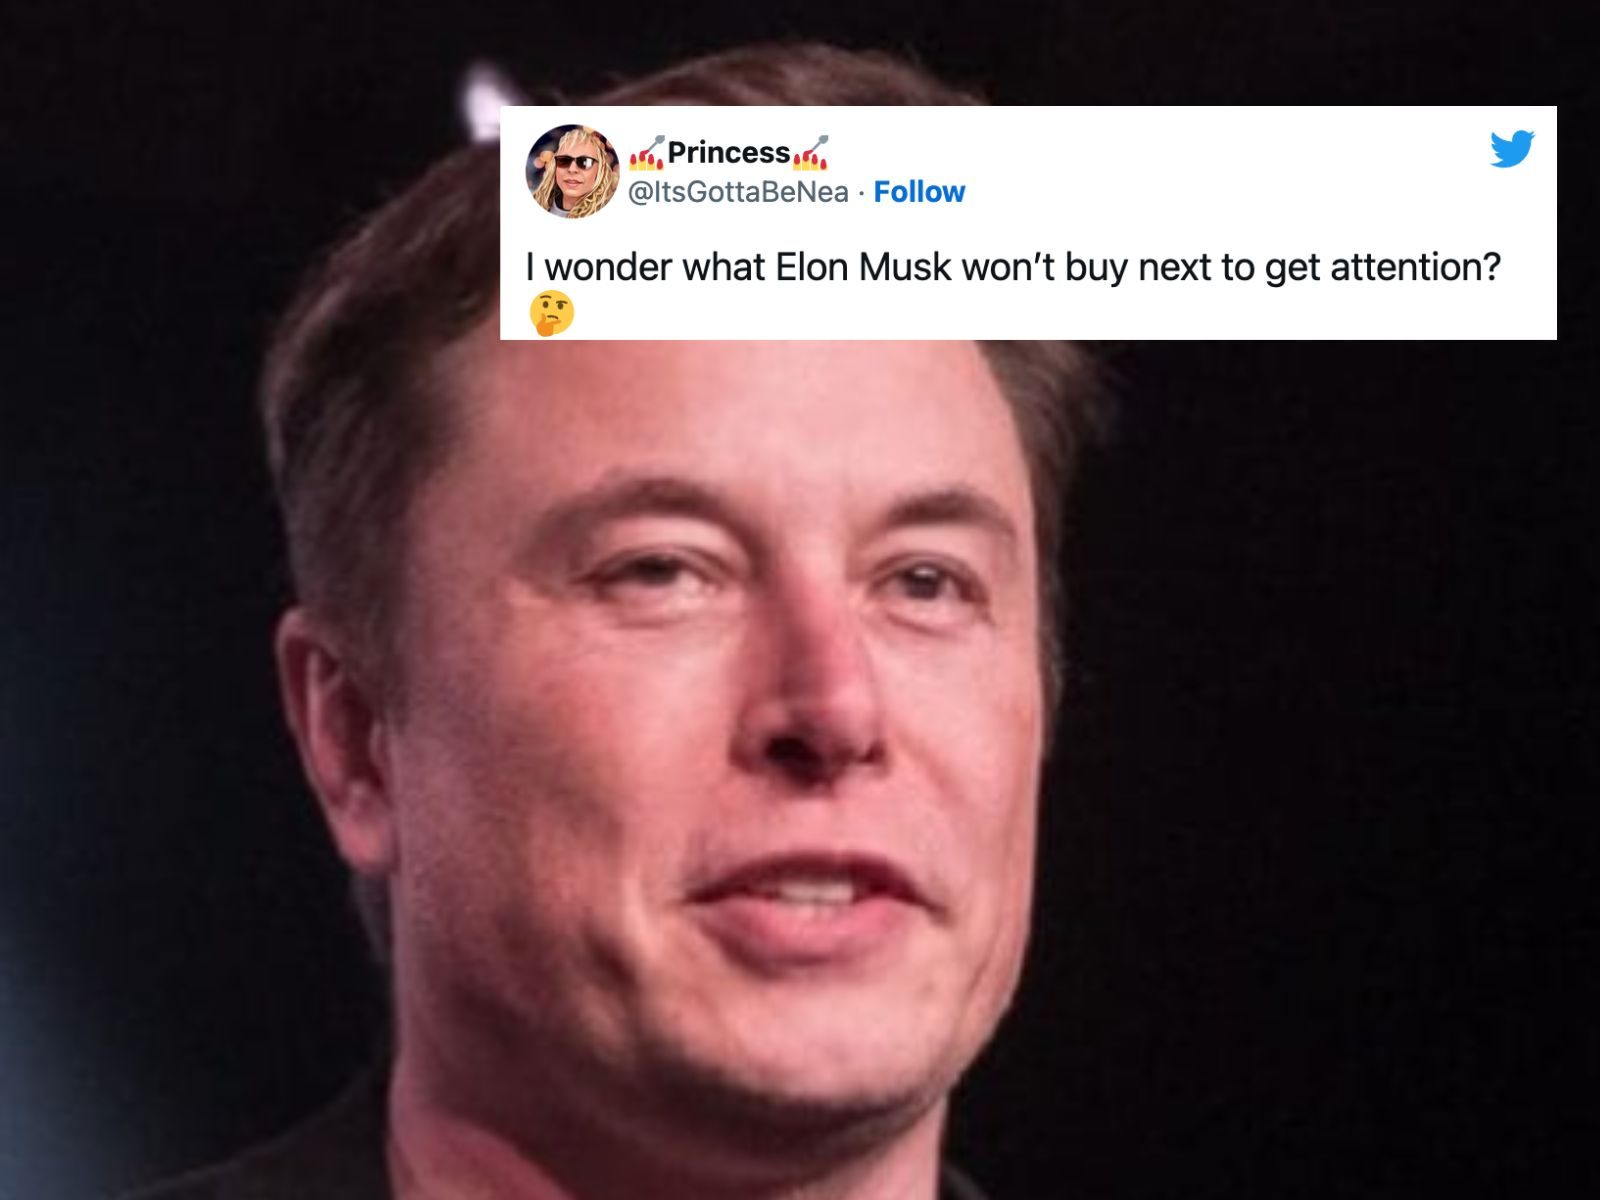 Elon Musk just Rickrolled his Twitter followers and the tweet is